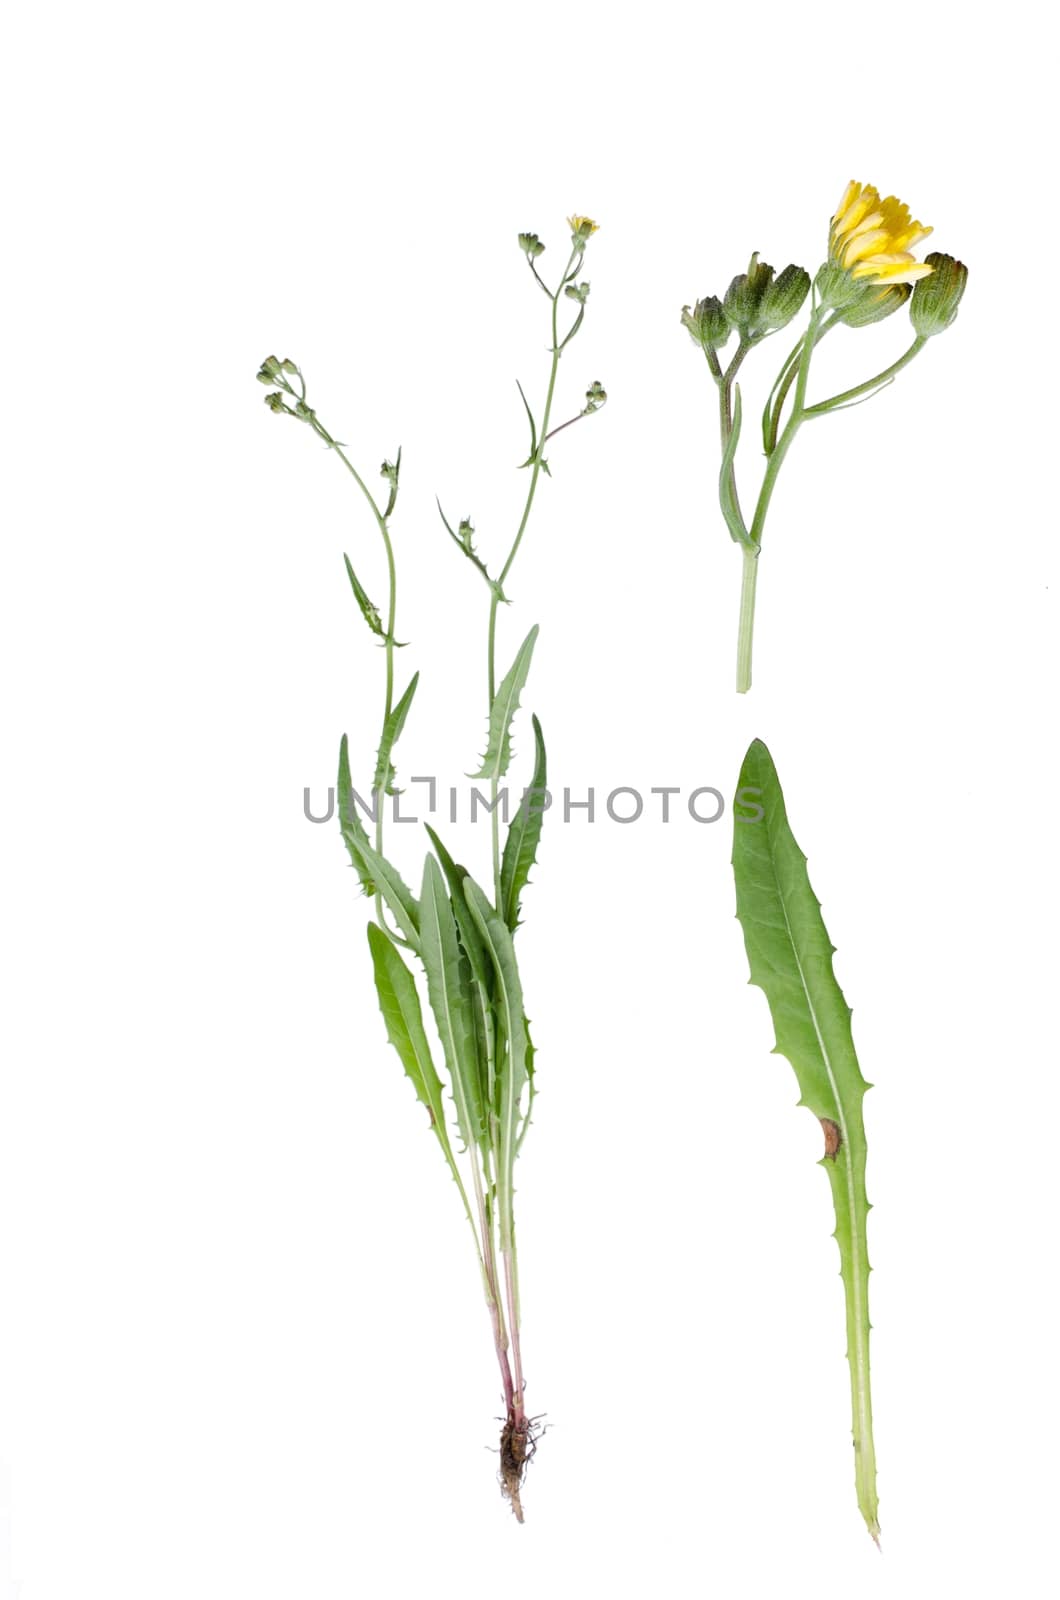 Yellow hawkweed isolated on white background with details of bloom and leaf beside.